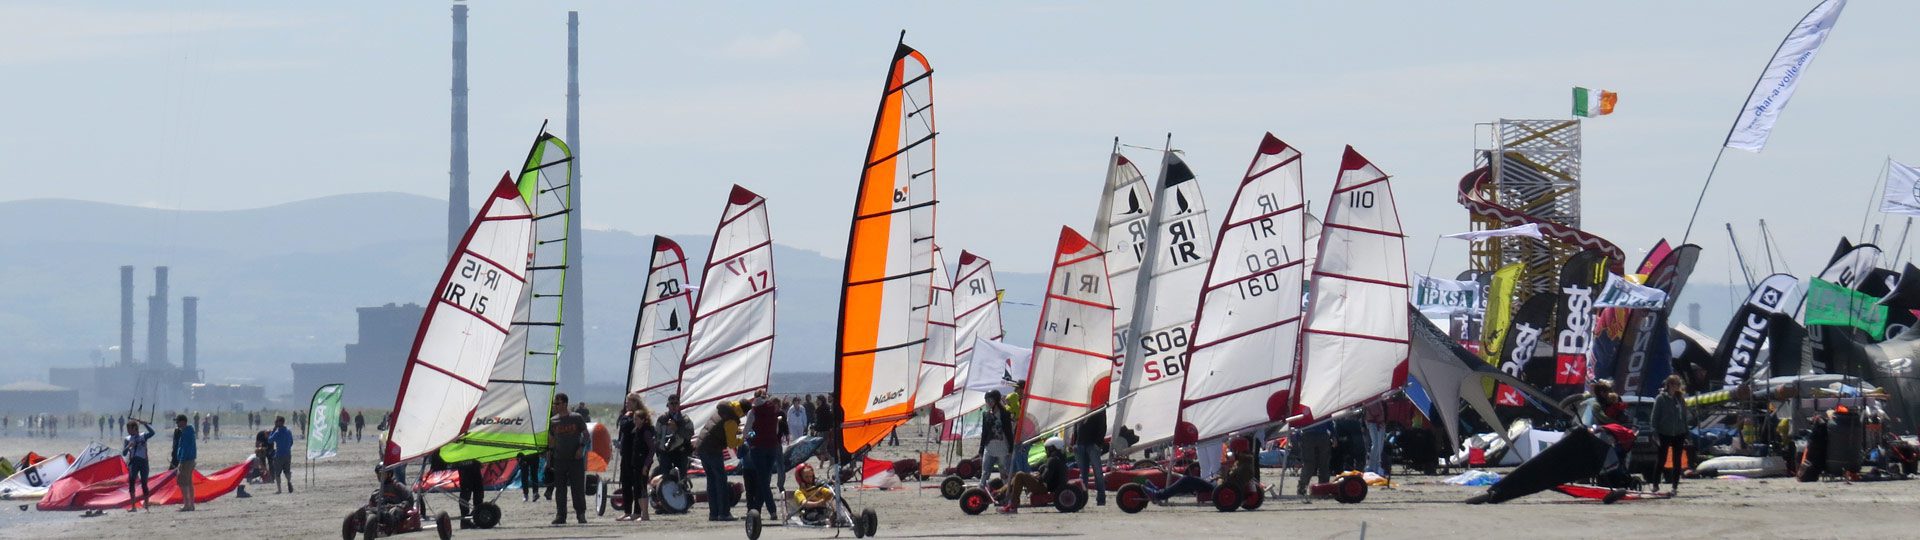 The Battle of the Bay Sail Cart Race